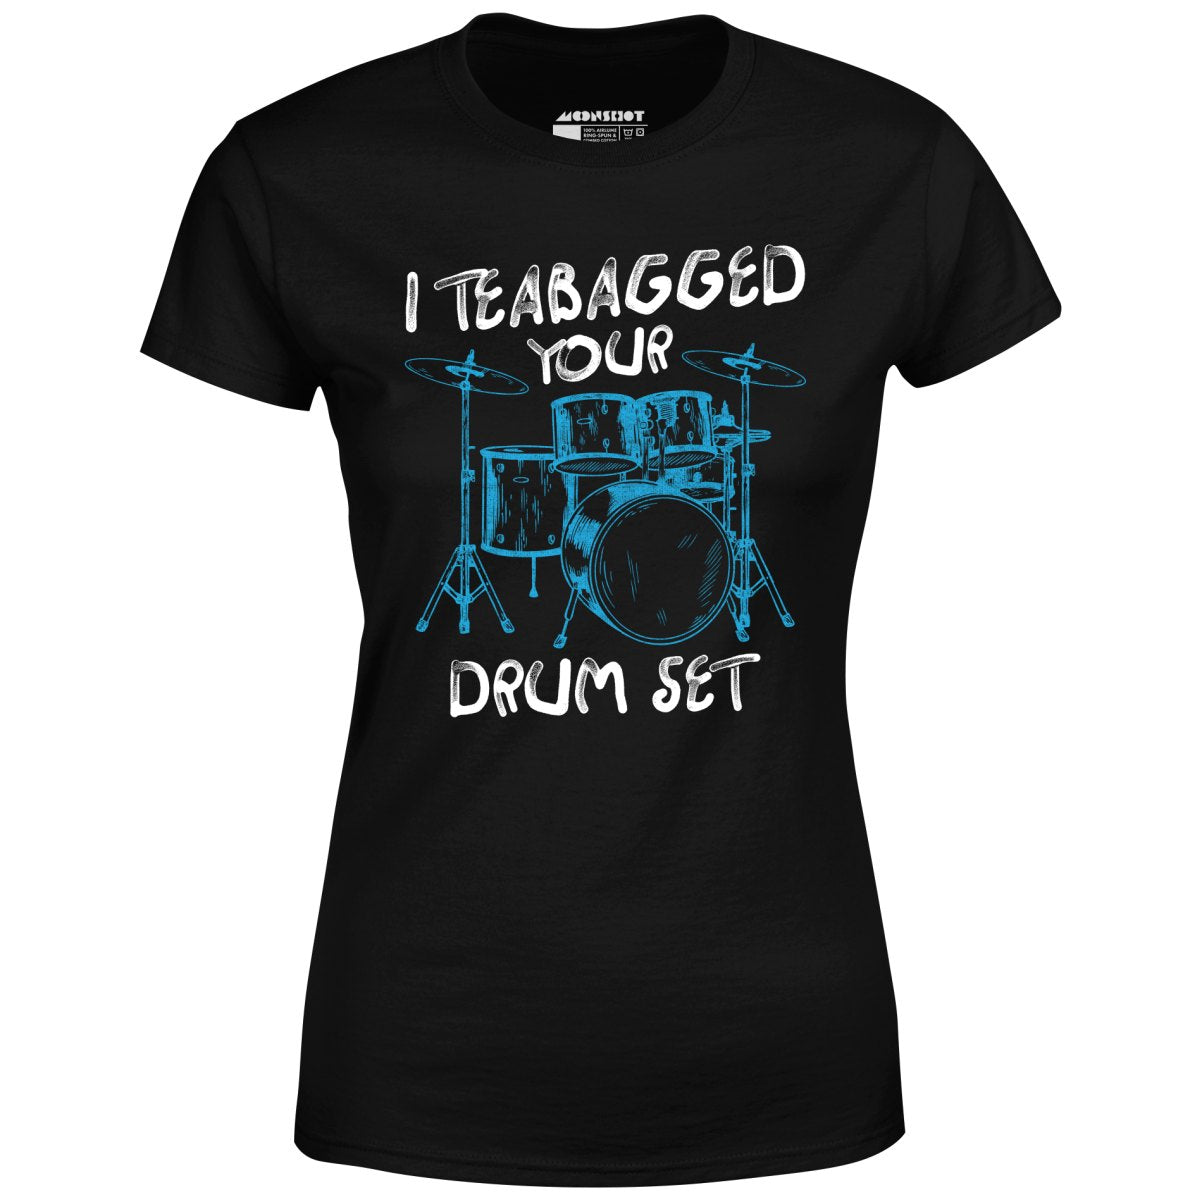 I Teabagged Your Drum Set - Women's T-Shirt